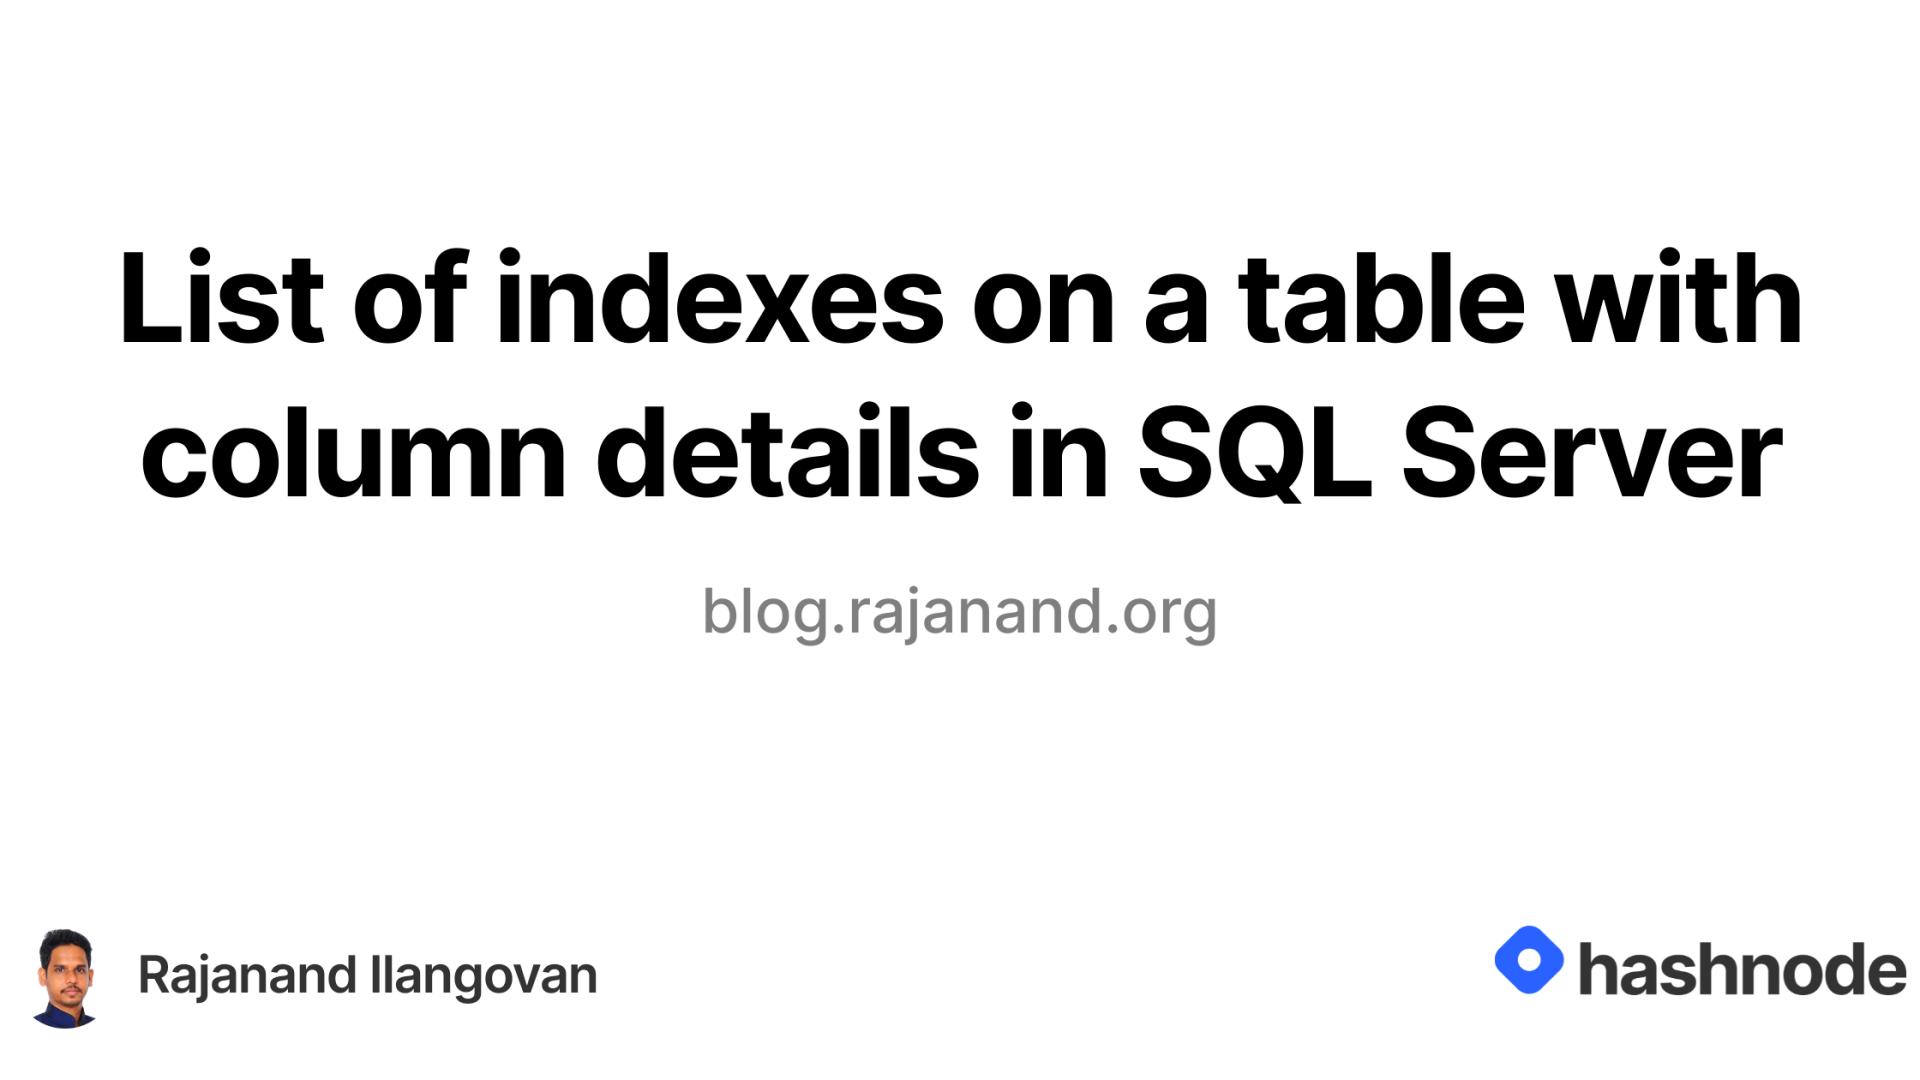 List of indexes on a table with column details in SQL Server